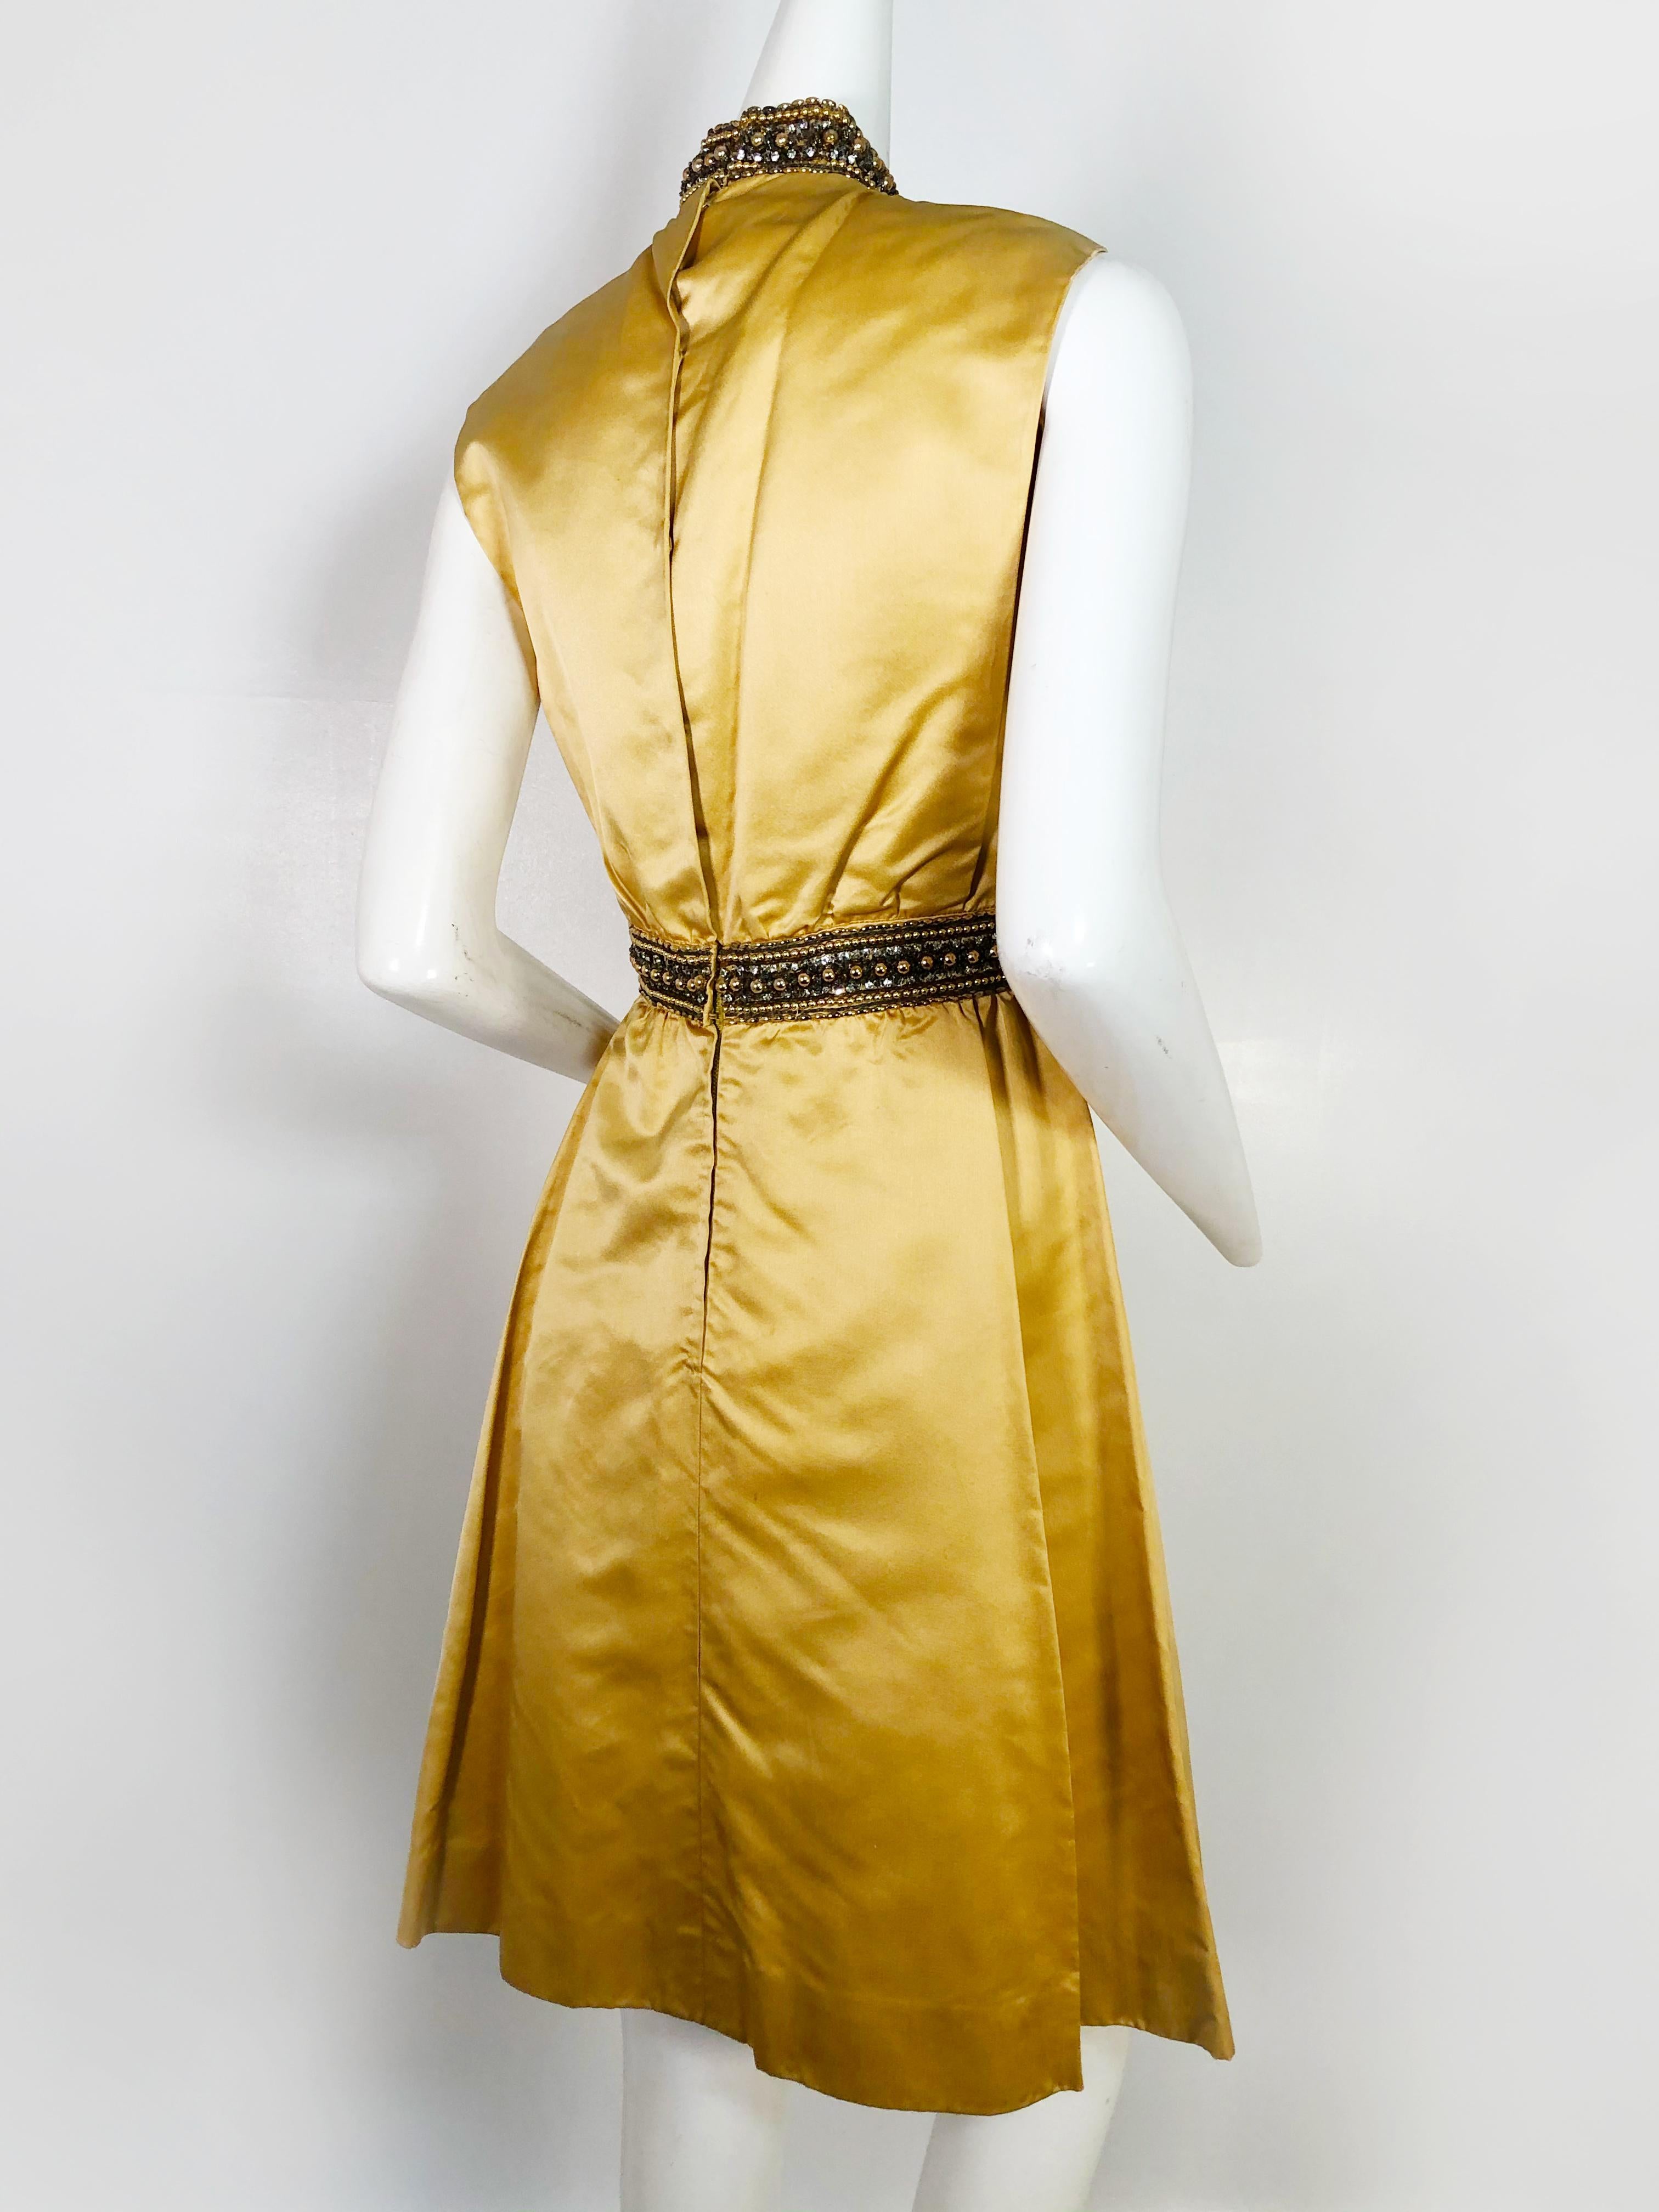 1960s Chester Weinberg Gold Lame and Pastel Brocade Evening Coat Ensemble For Sale 1